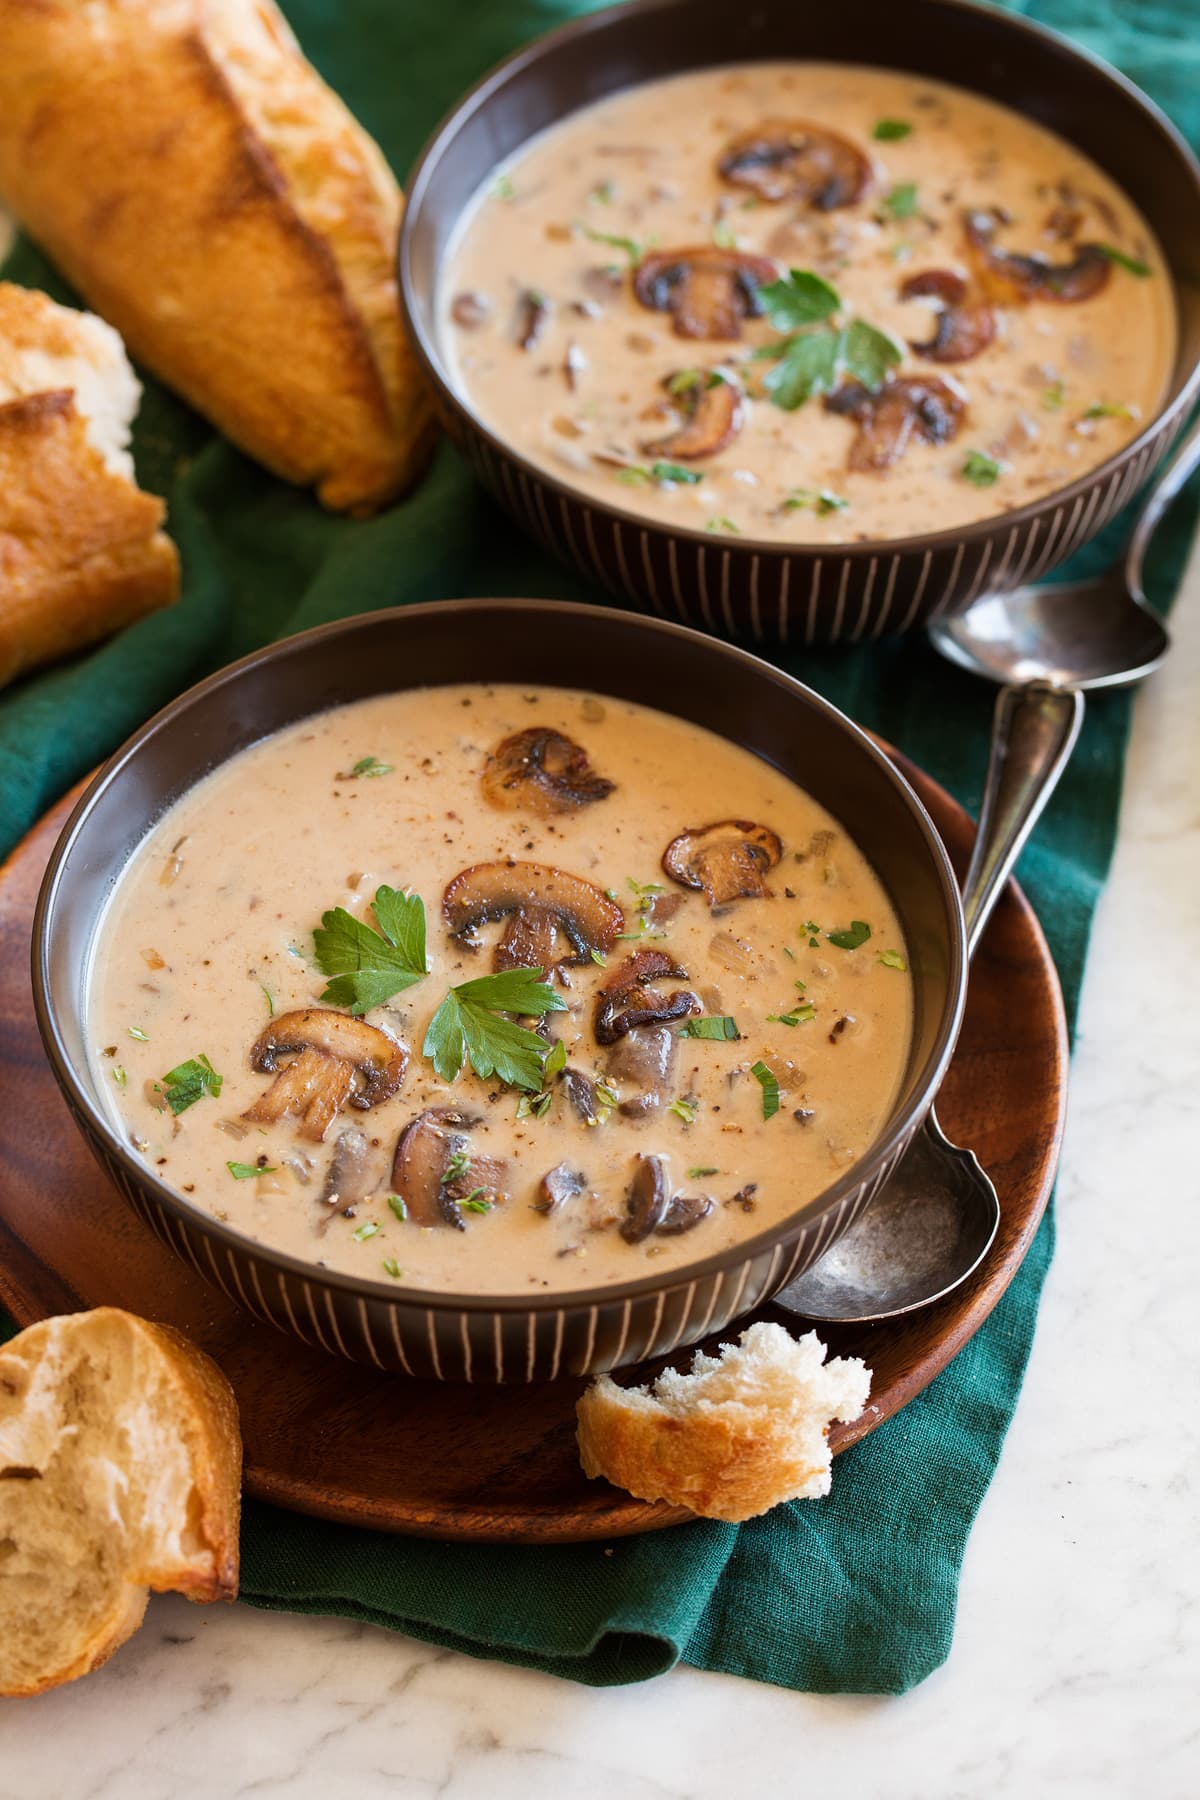 Two servings of mushroom soup in brown bowls sitting on a green cloth on a marble surface.